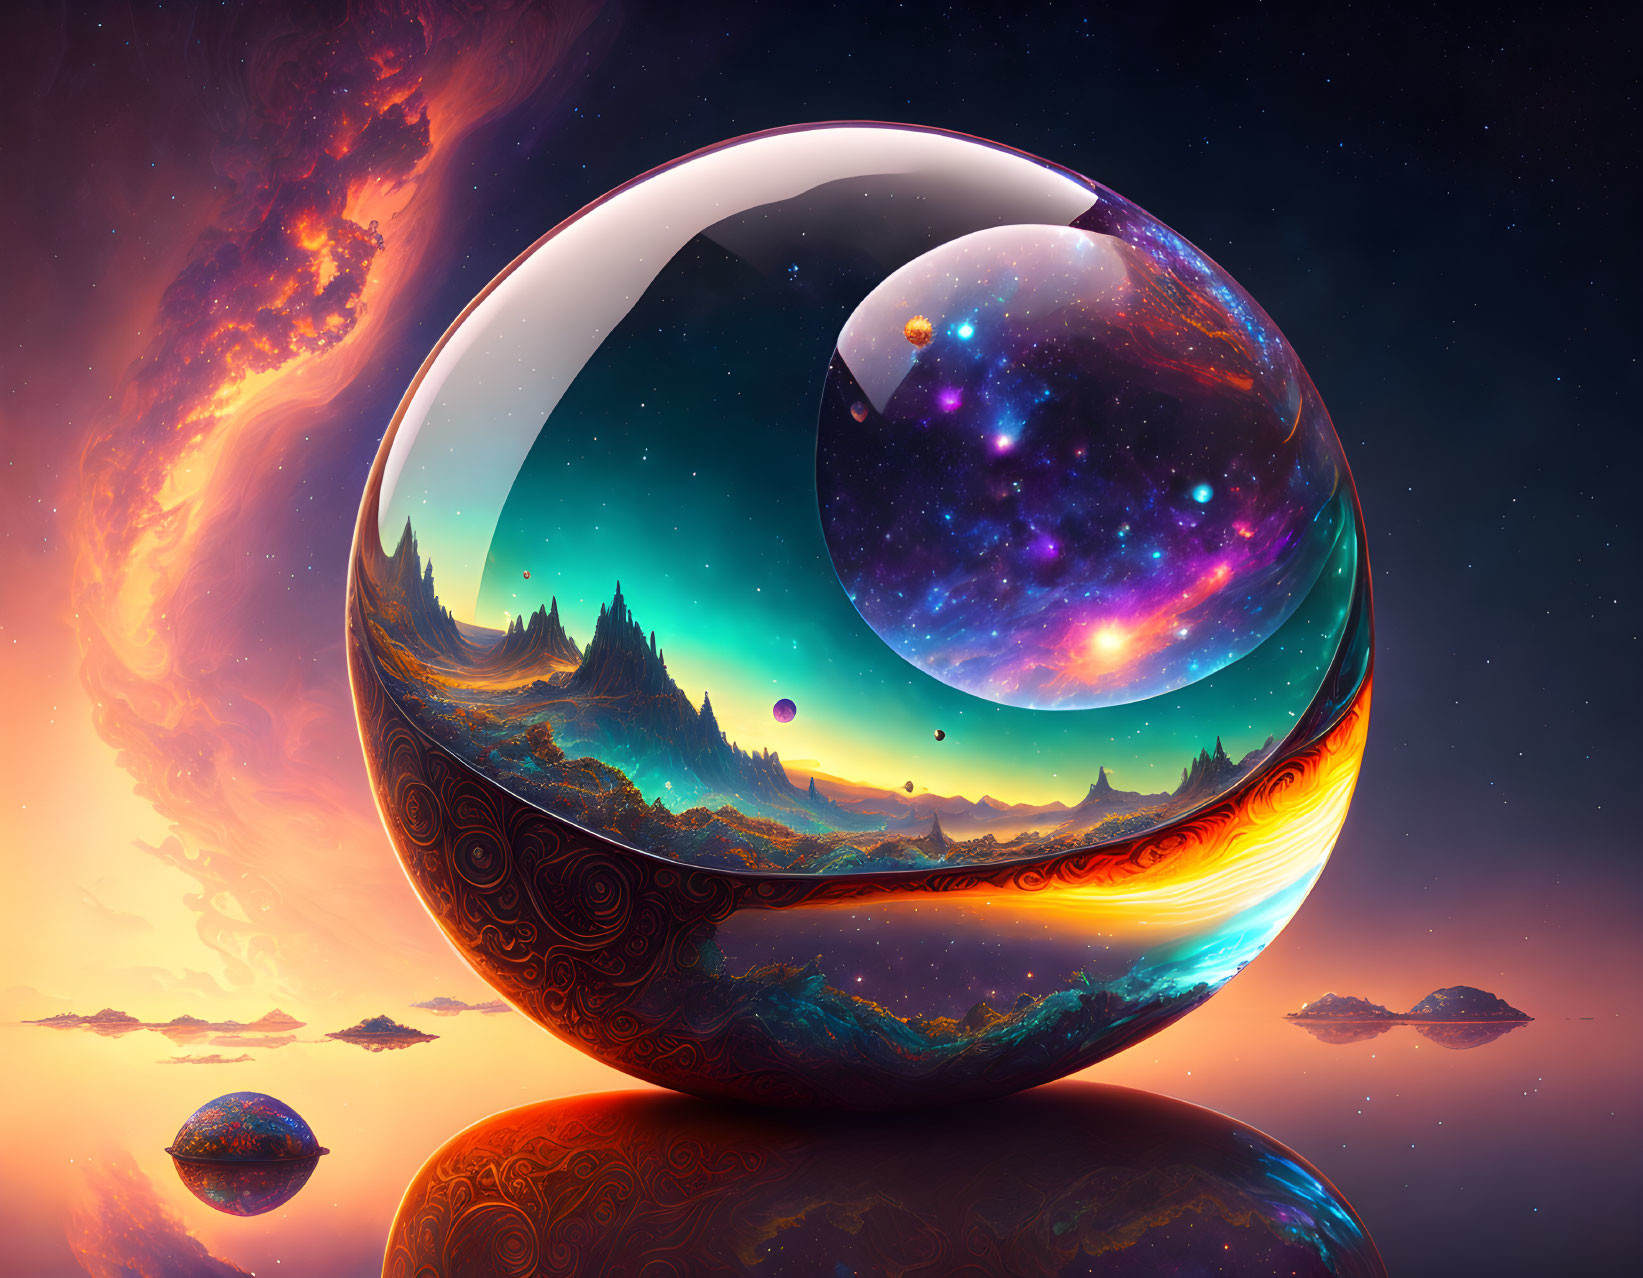 Surreal cosmic landscape with large reflective orb and starry sky